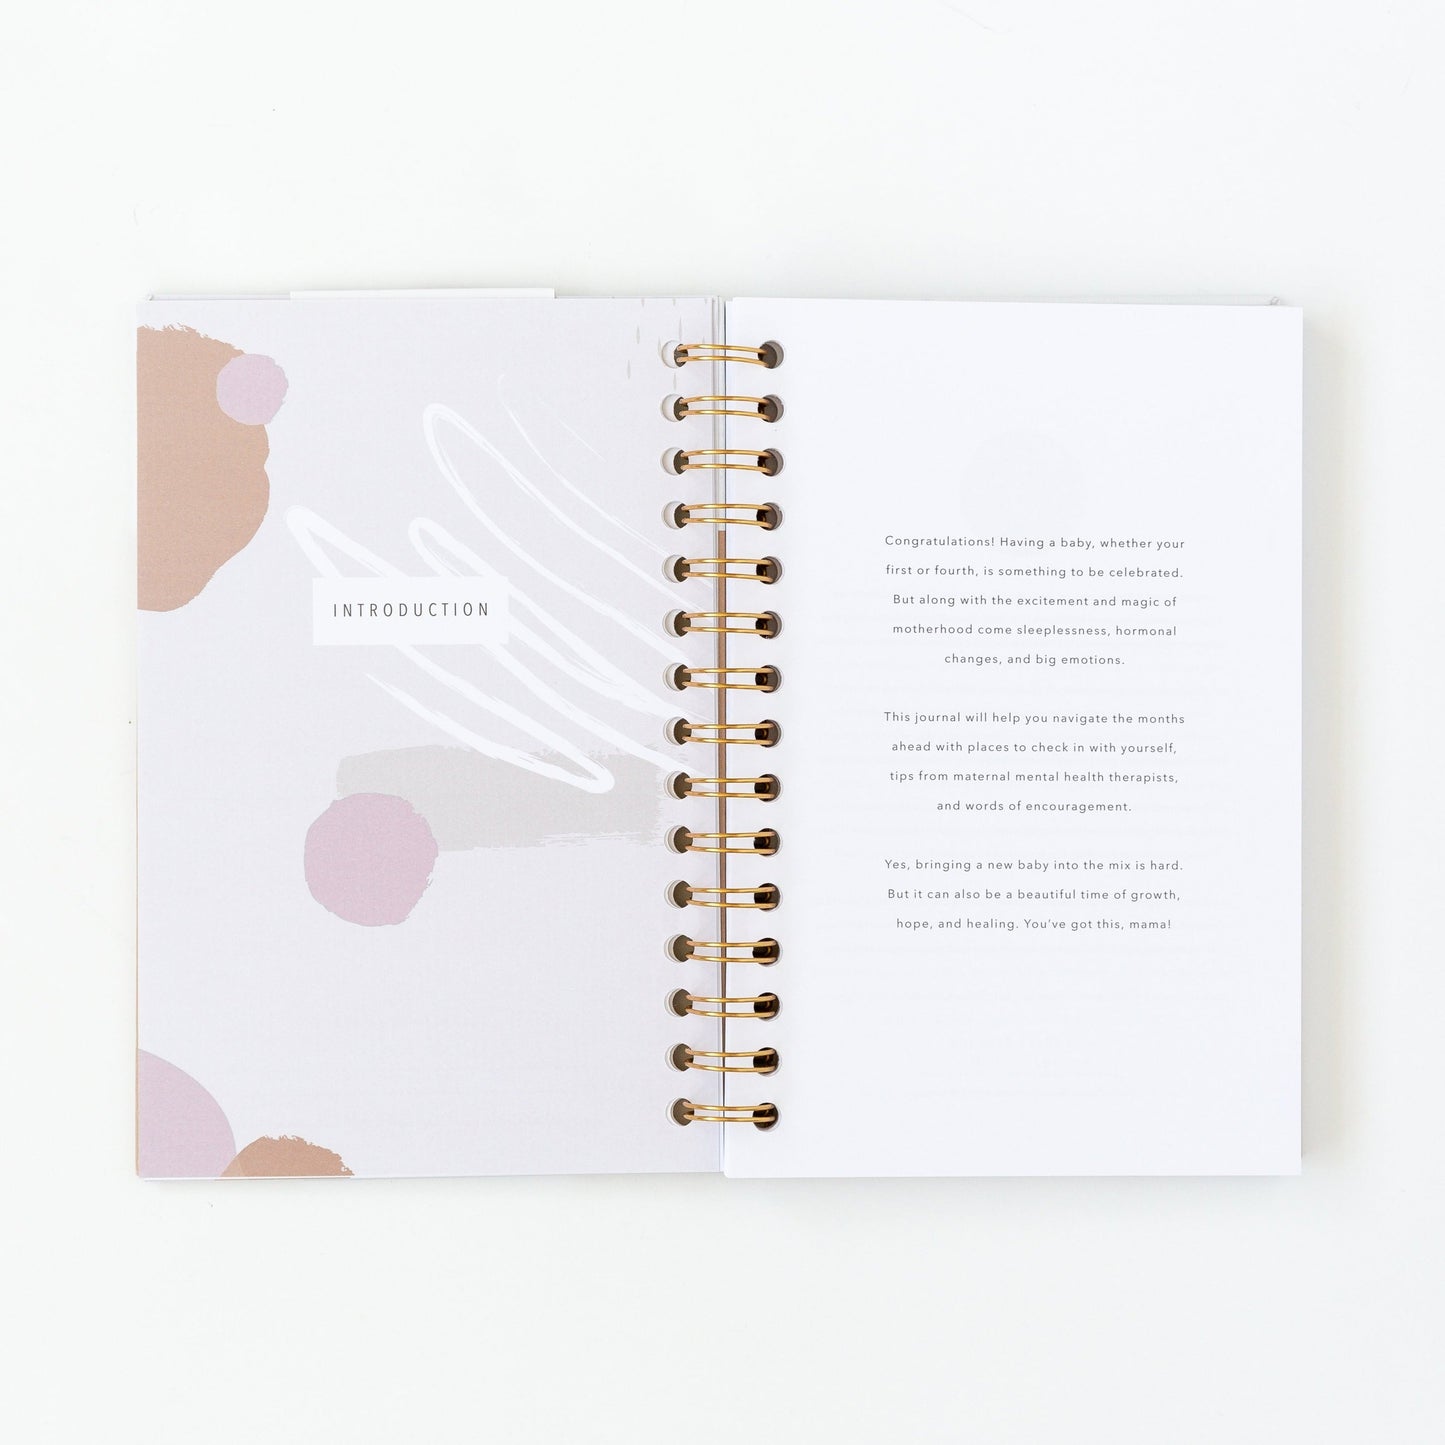 My Postpartum Journal: A Year of Self-Care (Country Peach) by Promptly Journals